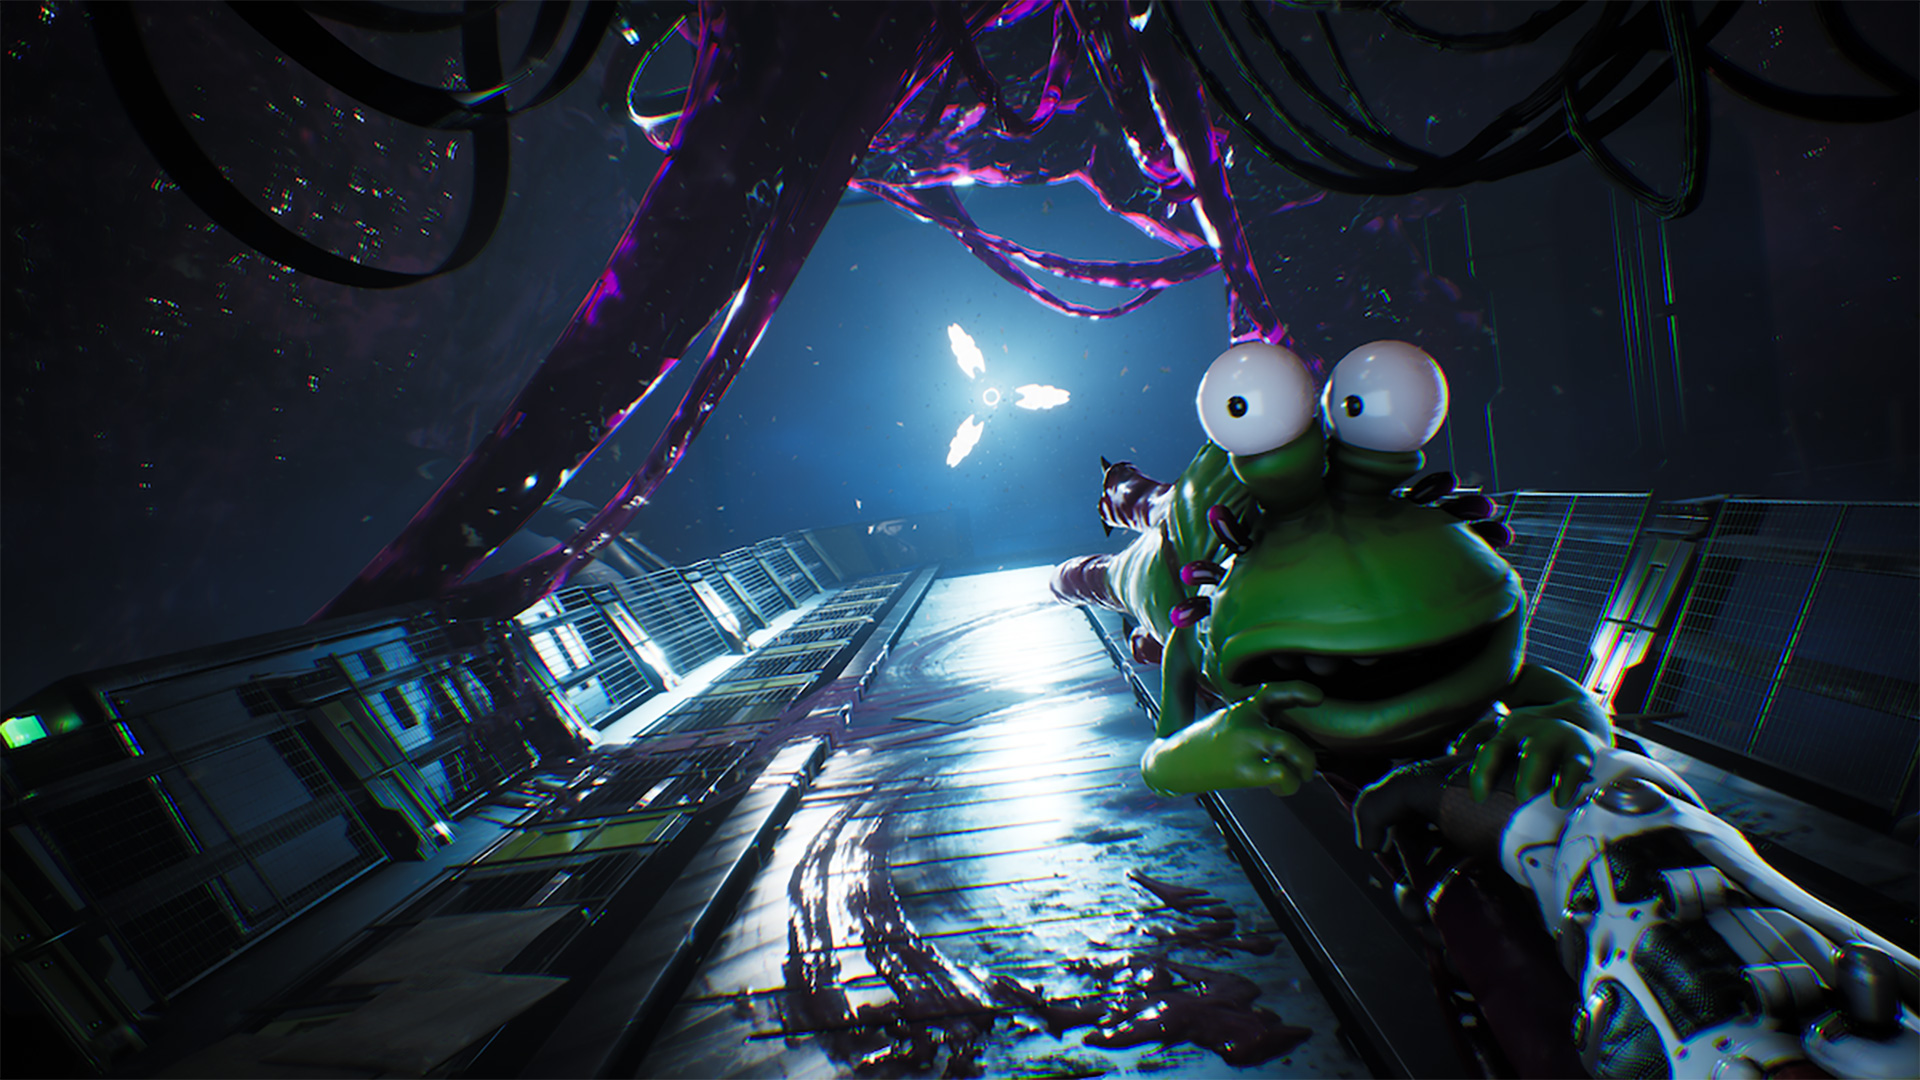 In-game screenshot from High on Life